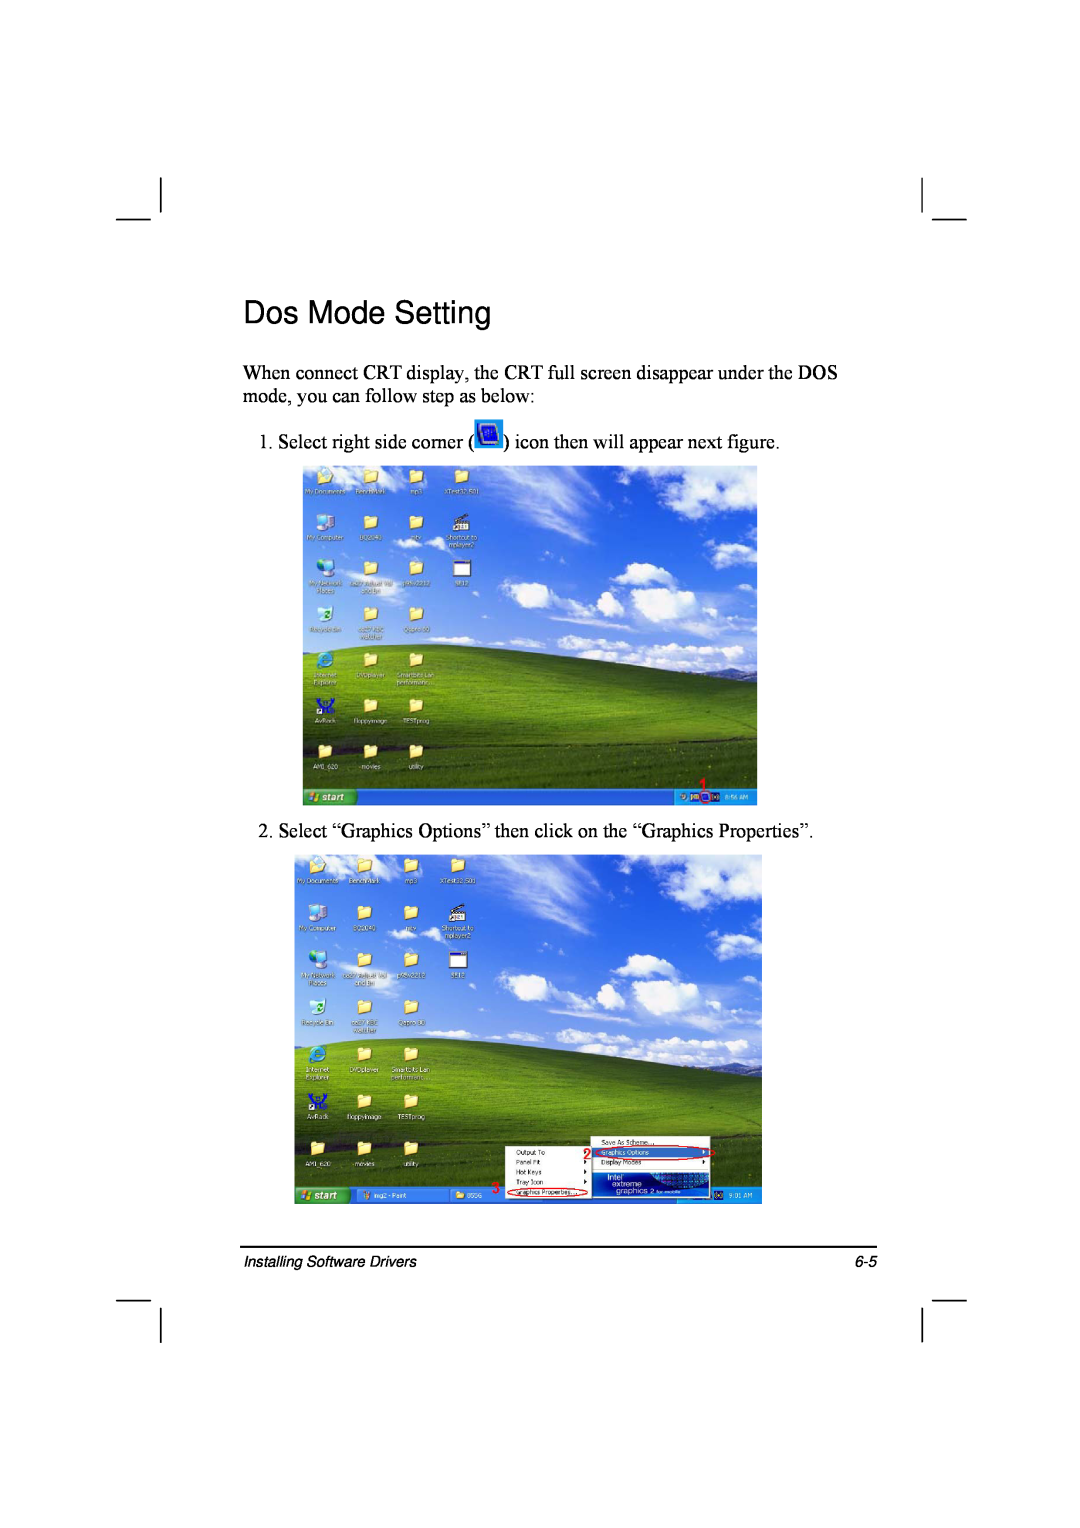 TAG 20 Series Dos Mode Setting, Select right side corner icon then will appear next figure, Installing Software Drivers 